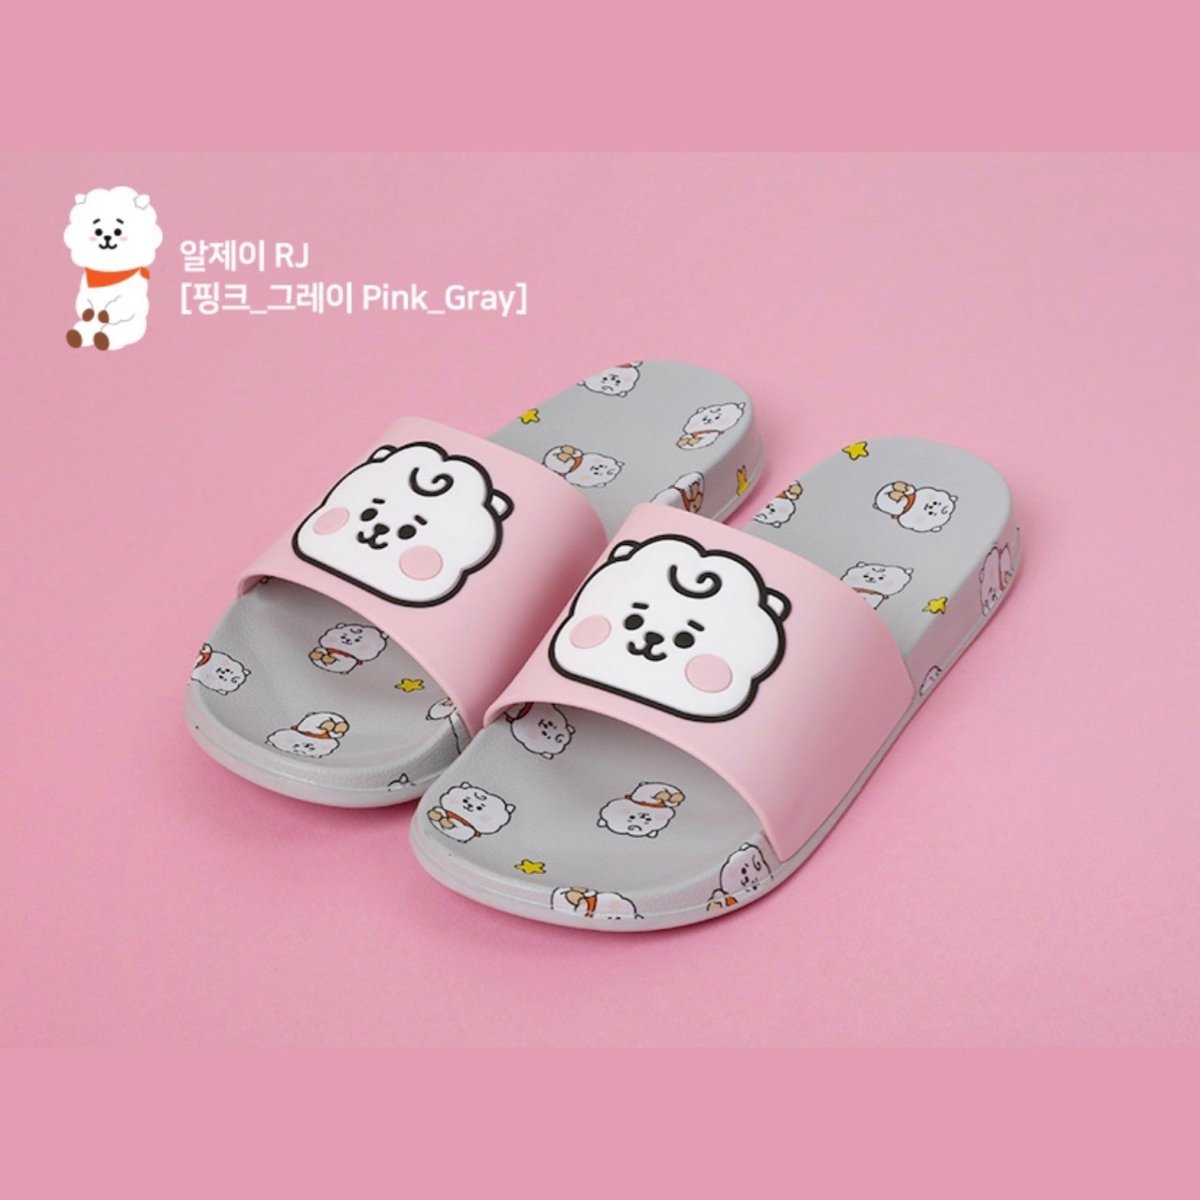 BT21 Character Slippers in RJ Ivory from @linefriendsofficial ✨ They a